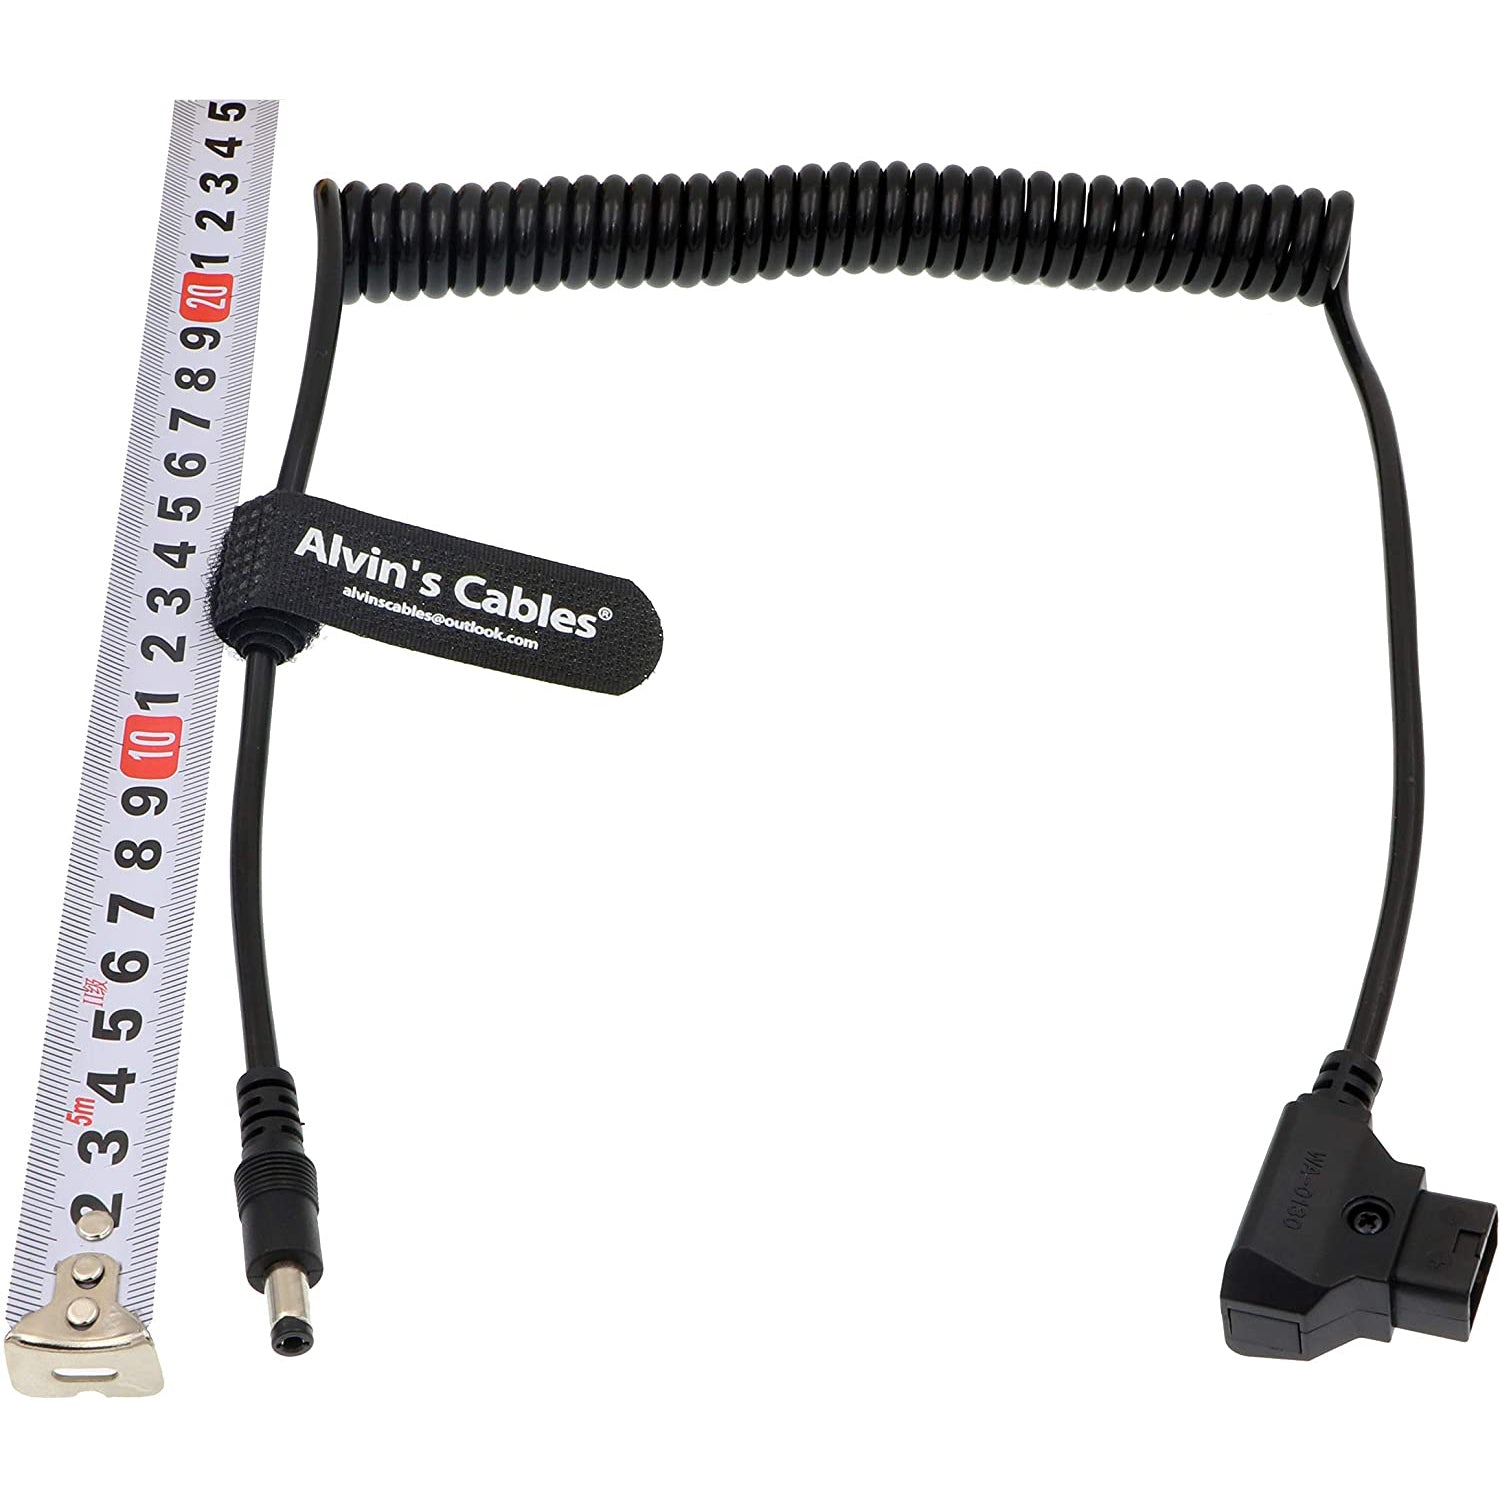 Alvin's Cables Anton Bauer Power Tap D Tap to 2.1 DC 12v Spring Cable for KiPRO LCD Monitors